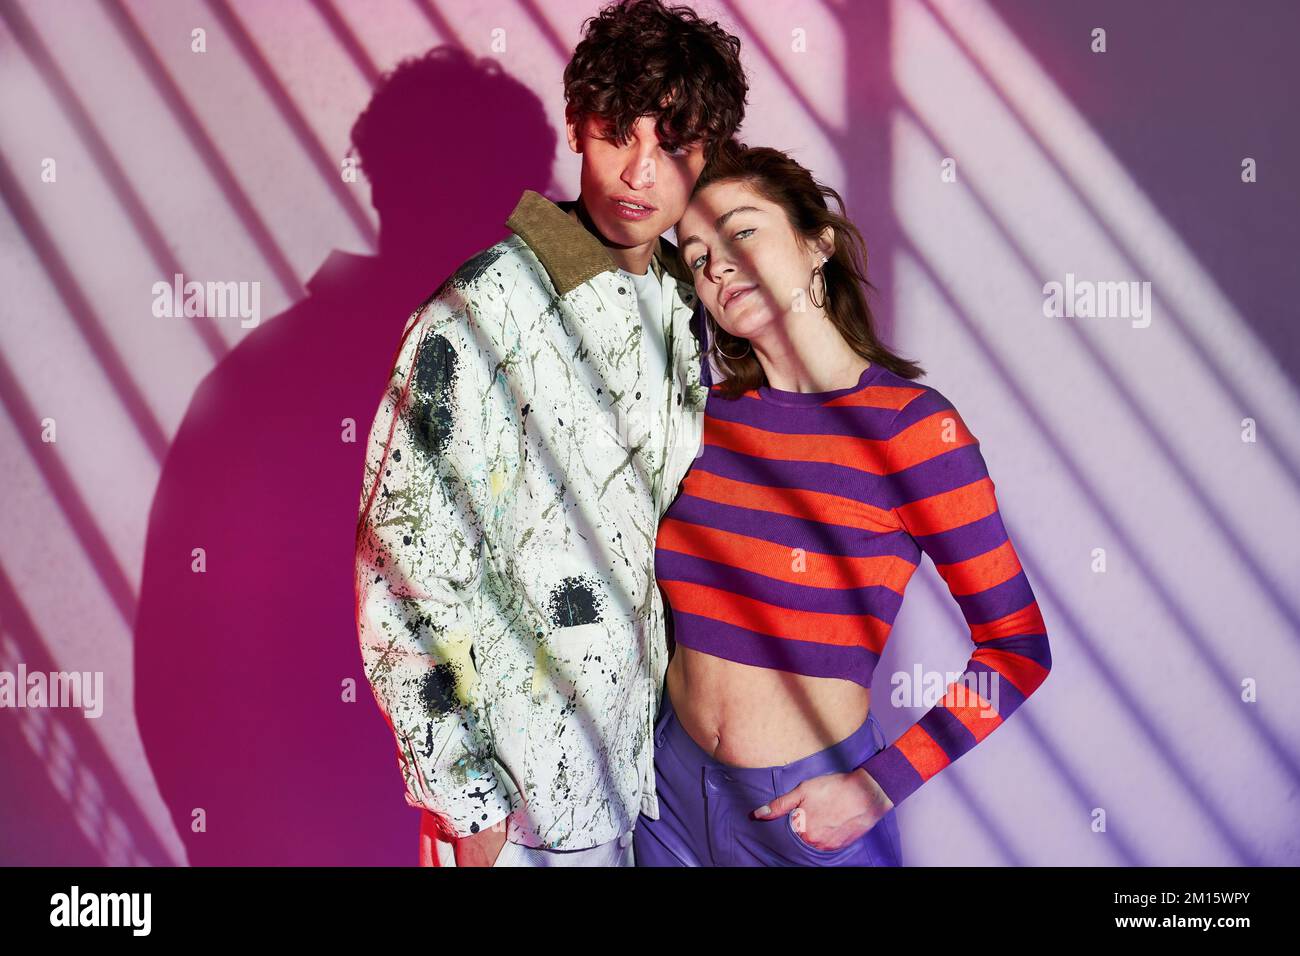 Arrogant boyfriend and girlfriend in colorful street style outfits standing near purple wall and hugging in studio with striped lightning Stock Photo